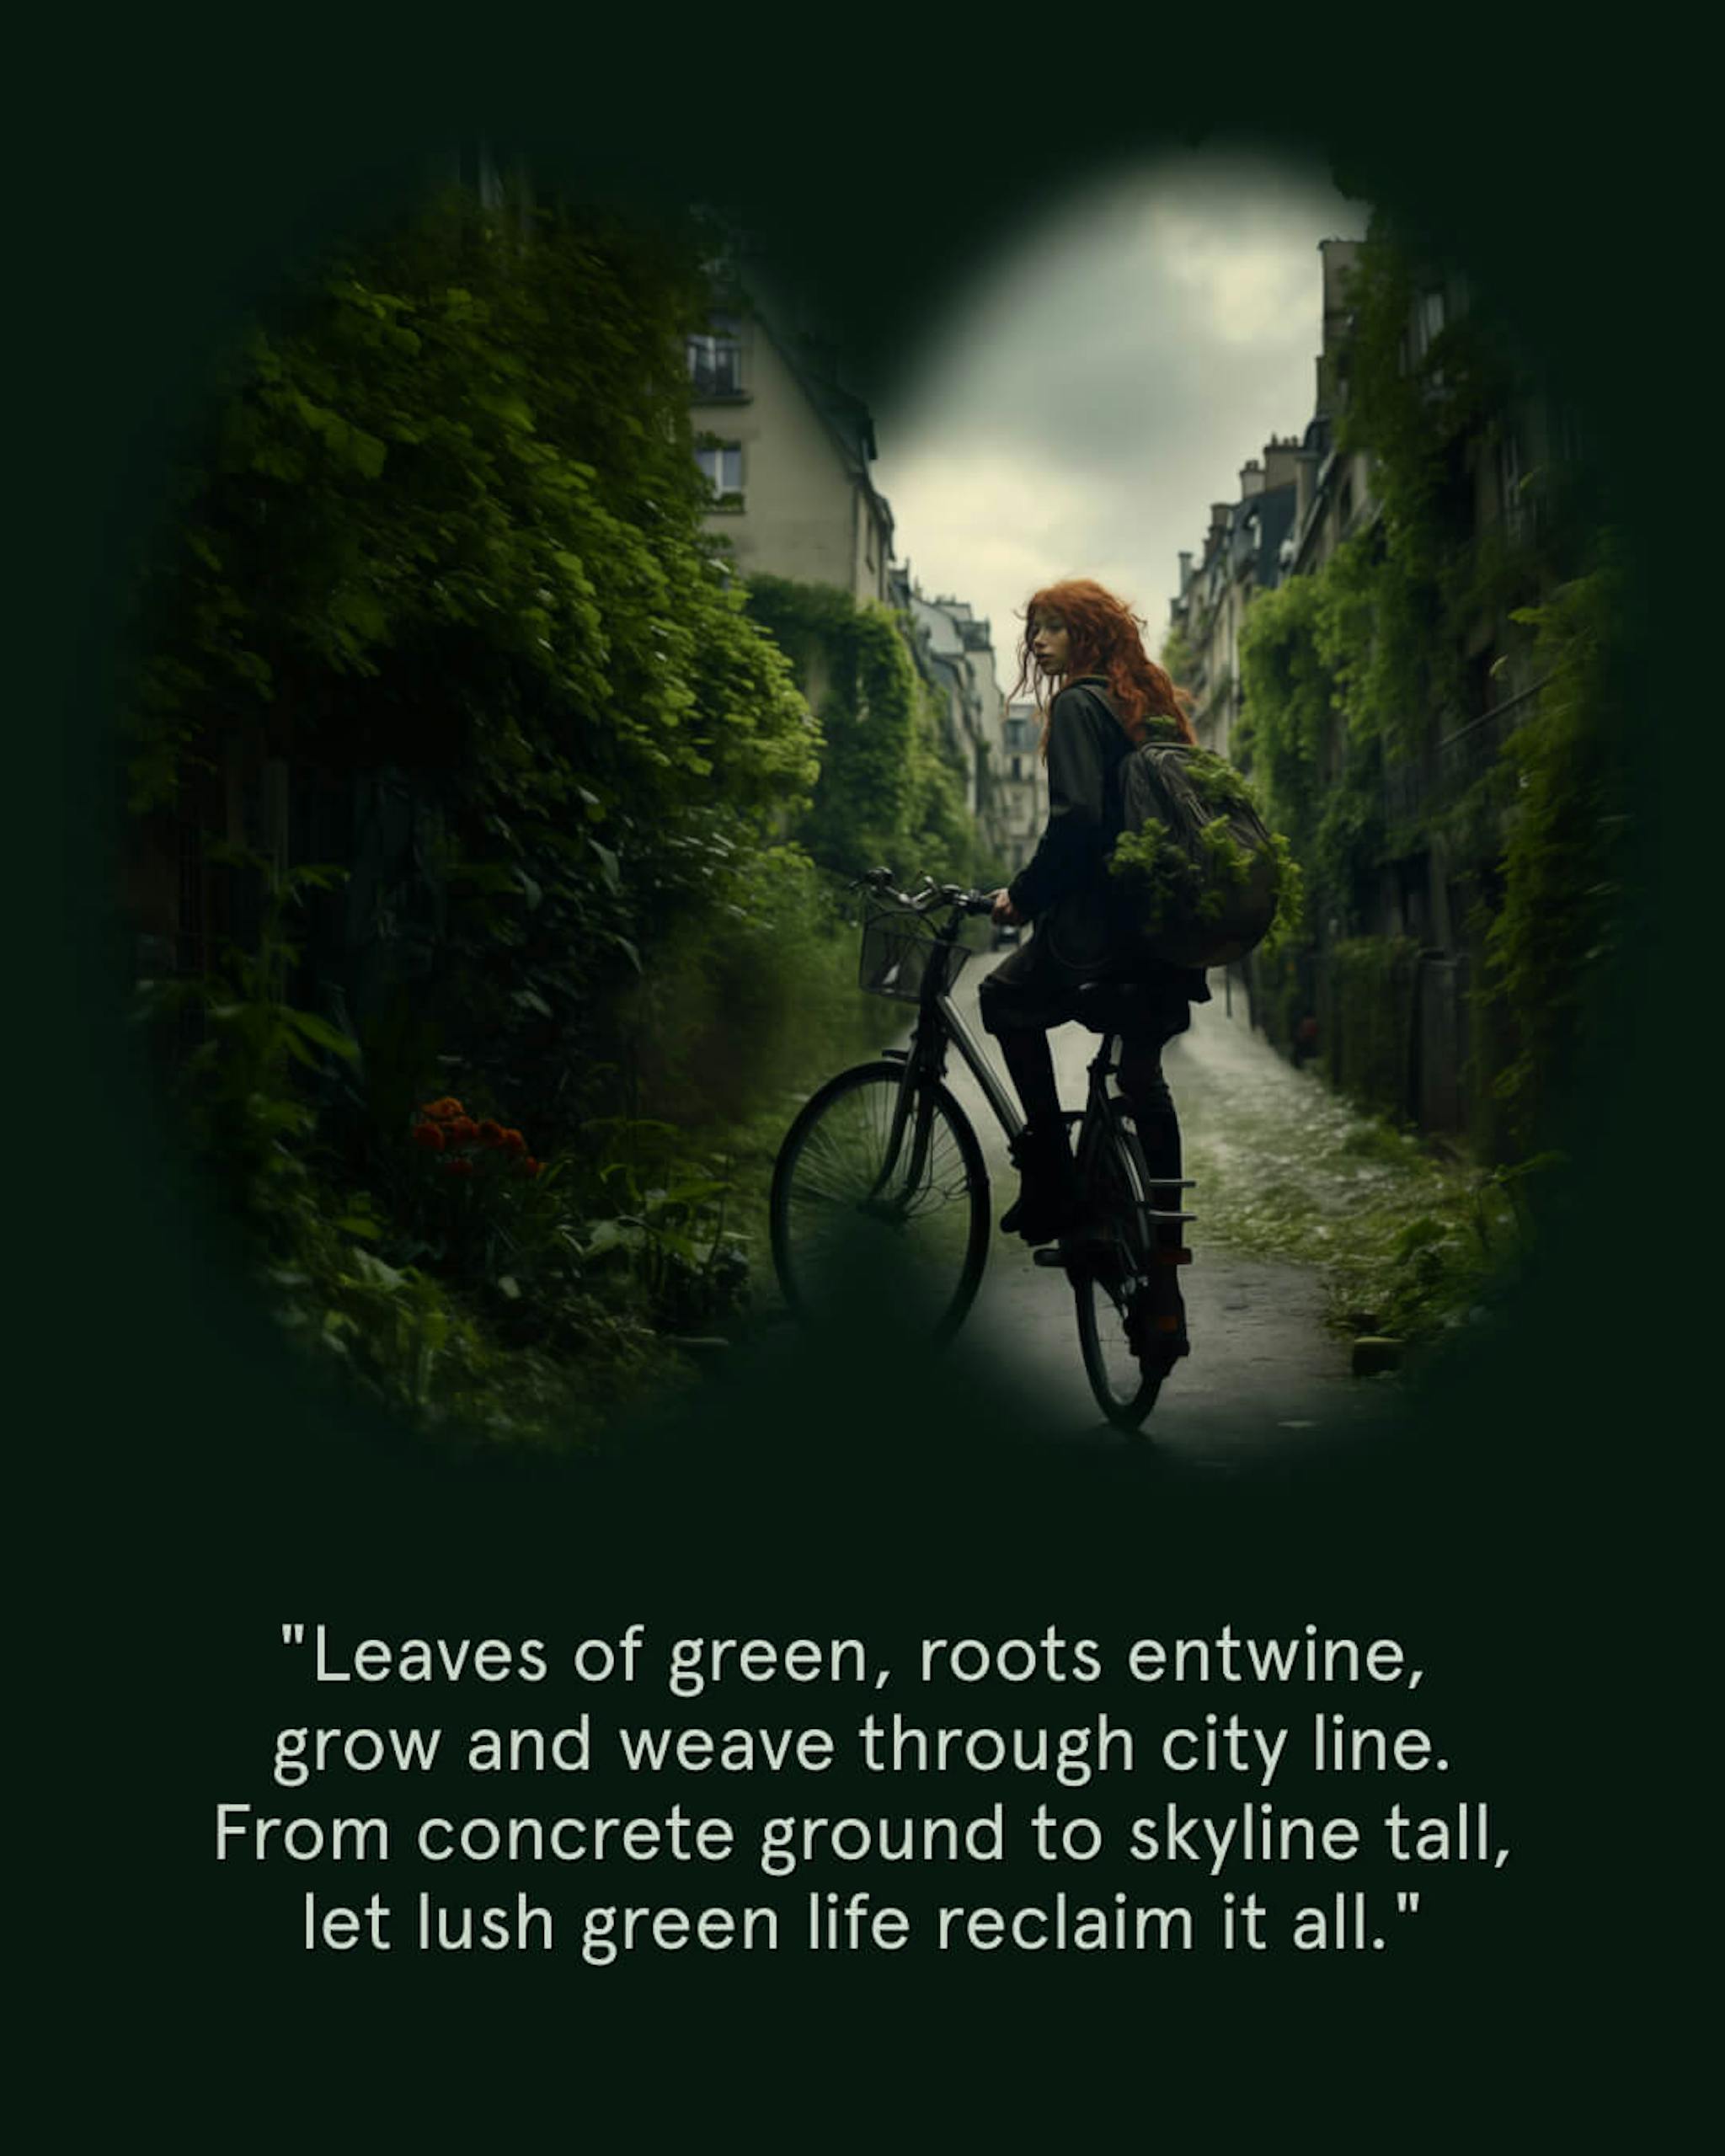 A person riding a bicycle on a cobblestone path, surrounded by lush greenery that engulfs the buildings, viewed through a binocular vignette with a quote: "Leaves of green, roots entwine, grow and weave through city line. From concrete ground to skyline tall, let lush green life reclaim it all."